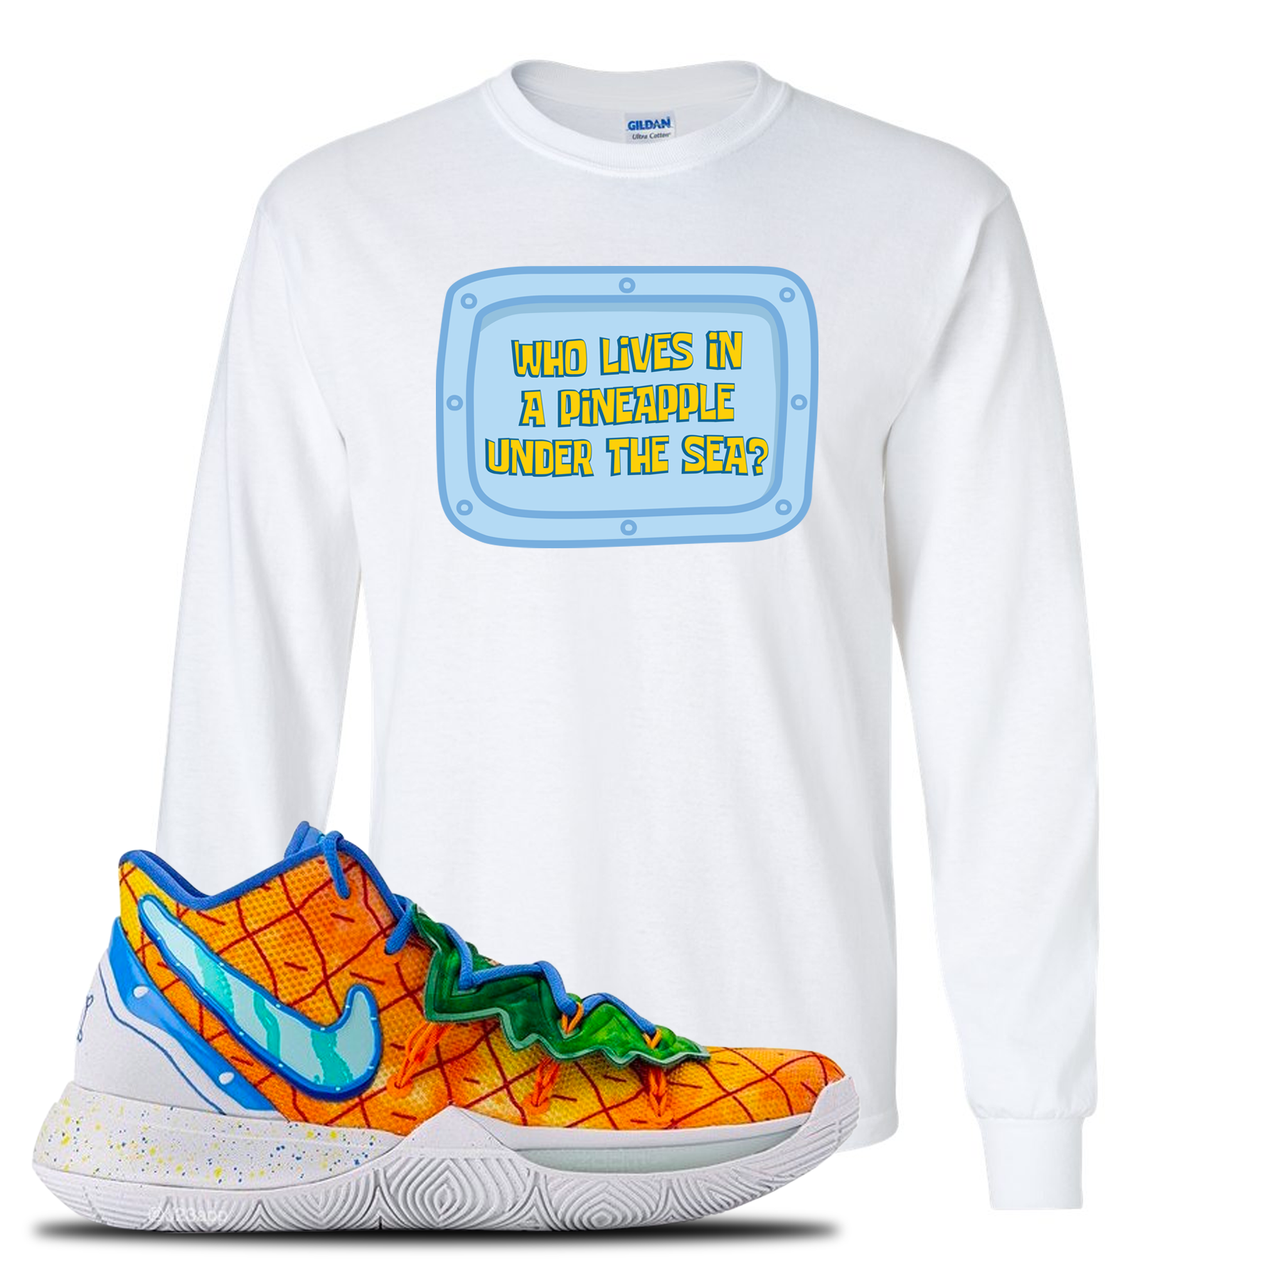 Kyrie 5 Pineapple House Who Lives in a Pineapple Under the Sea? White Sneaker Hook Up Longsleeve T-Shirt